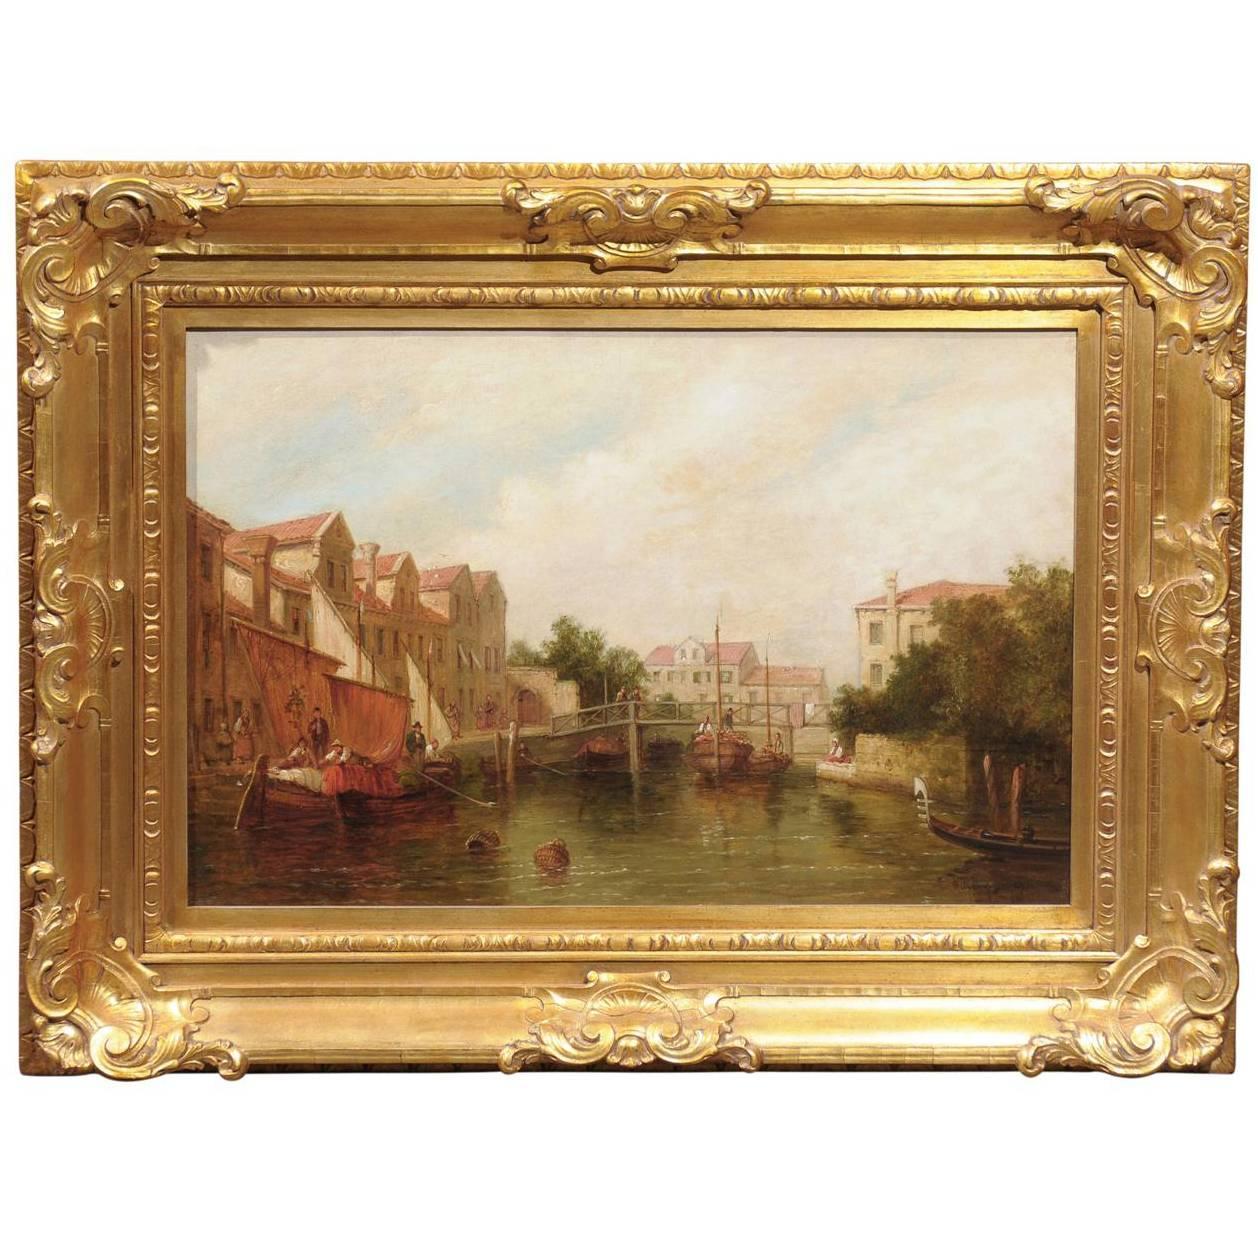 Oil Painting of a Canal Scene with Boats and Pedestrians from Late 19th Century - English Accent Antiques